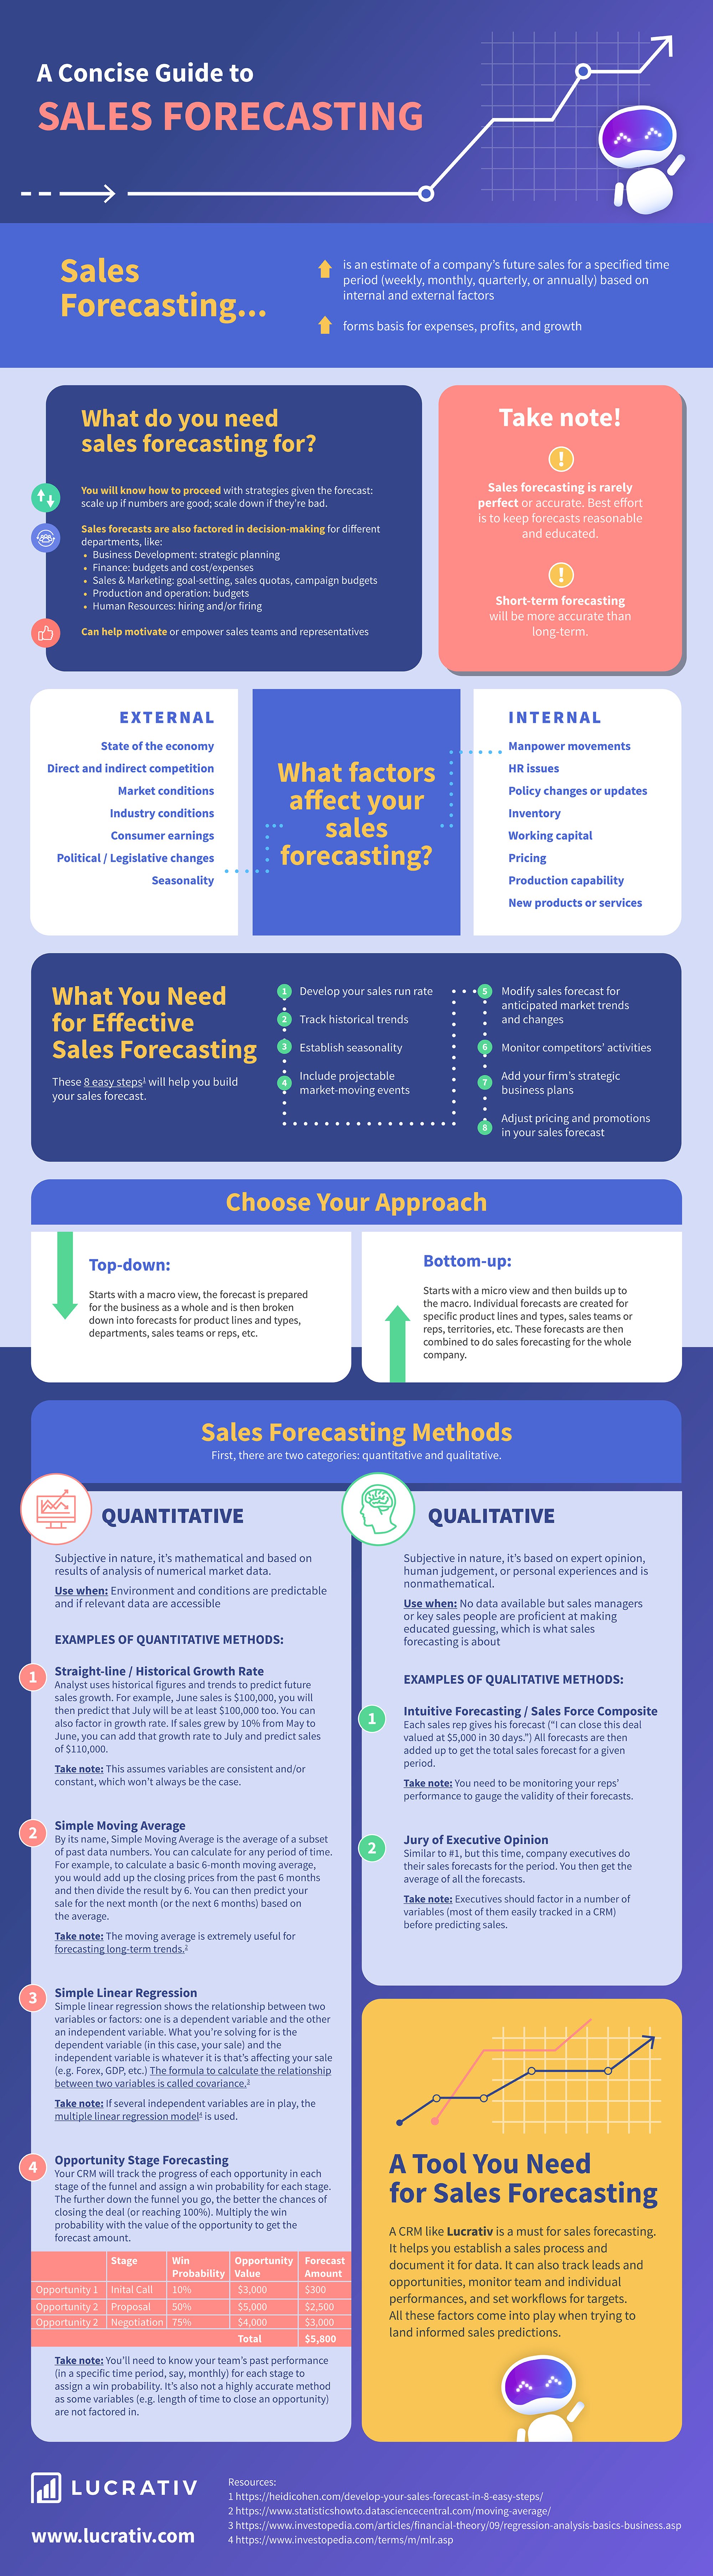 Lucrativ_A Concise Guide to Sales Forecasting